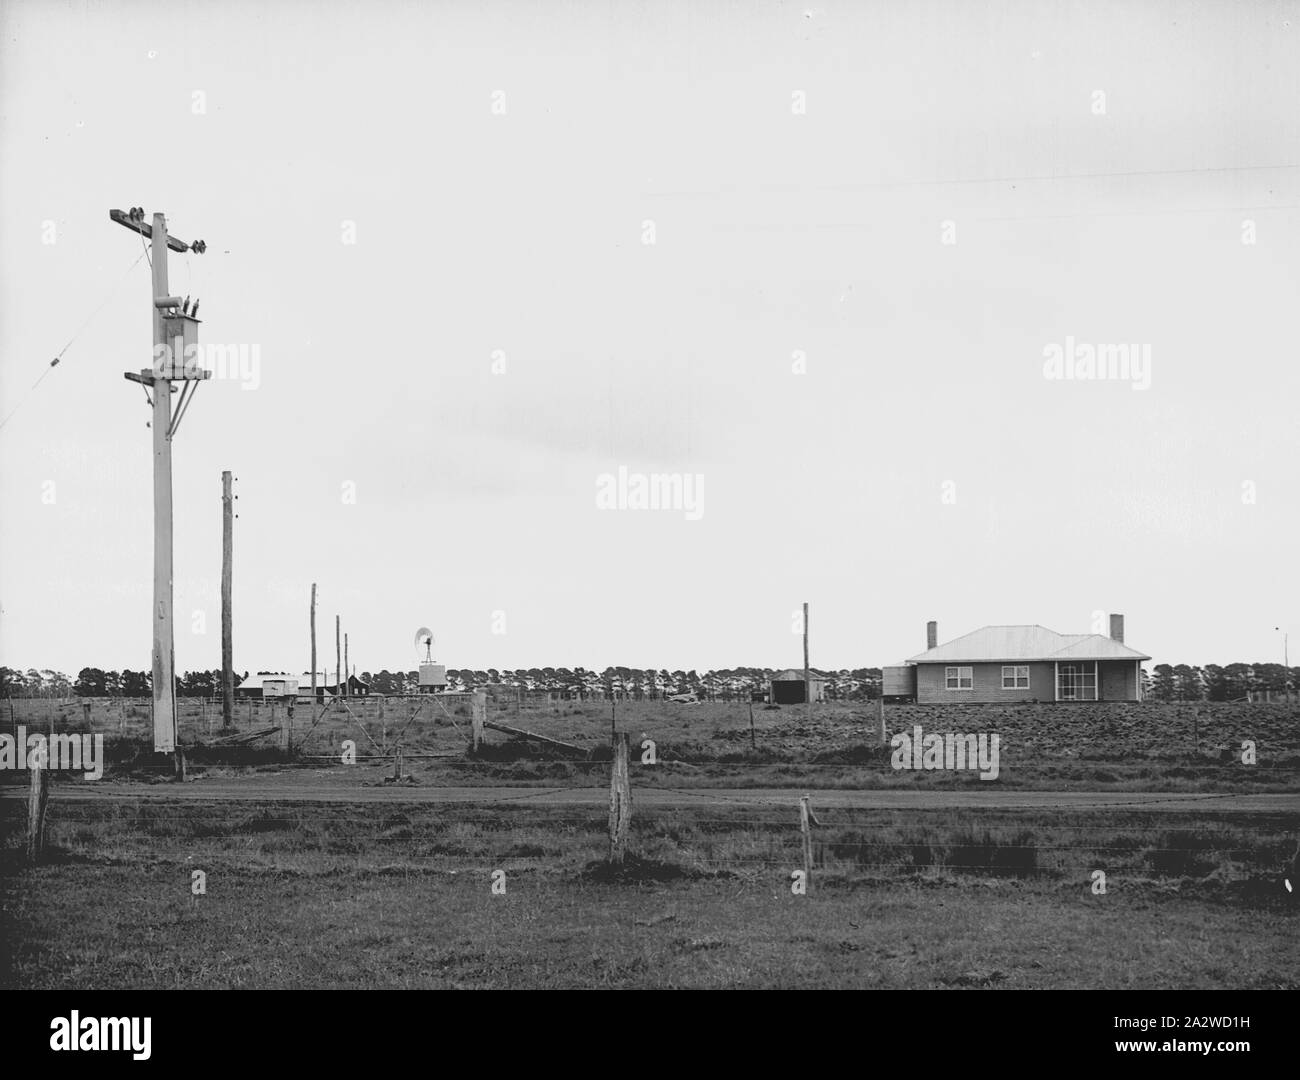 Glass Negative - Soldier Settlement Land, State Electricity Commission, Boorcan, Victoria, Oct 1949, Image of Boorcan - soldier settlement land. Part of a large photographic collection of glass plate and film negatives, photographic prints and photo albums, relating to the development of the electric power supply industry in Victoria, operated by the State Electricity Commission of Victoria (SECV Stock Photo